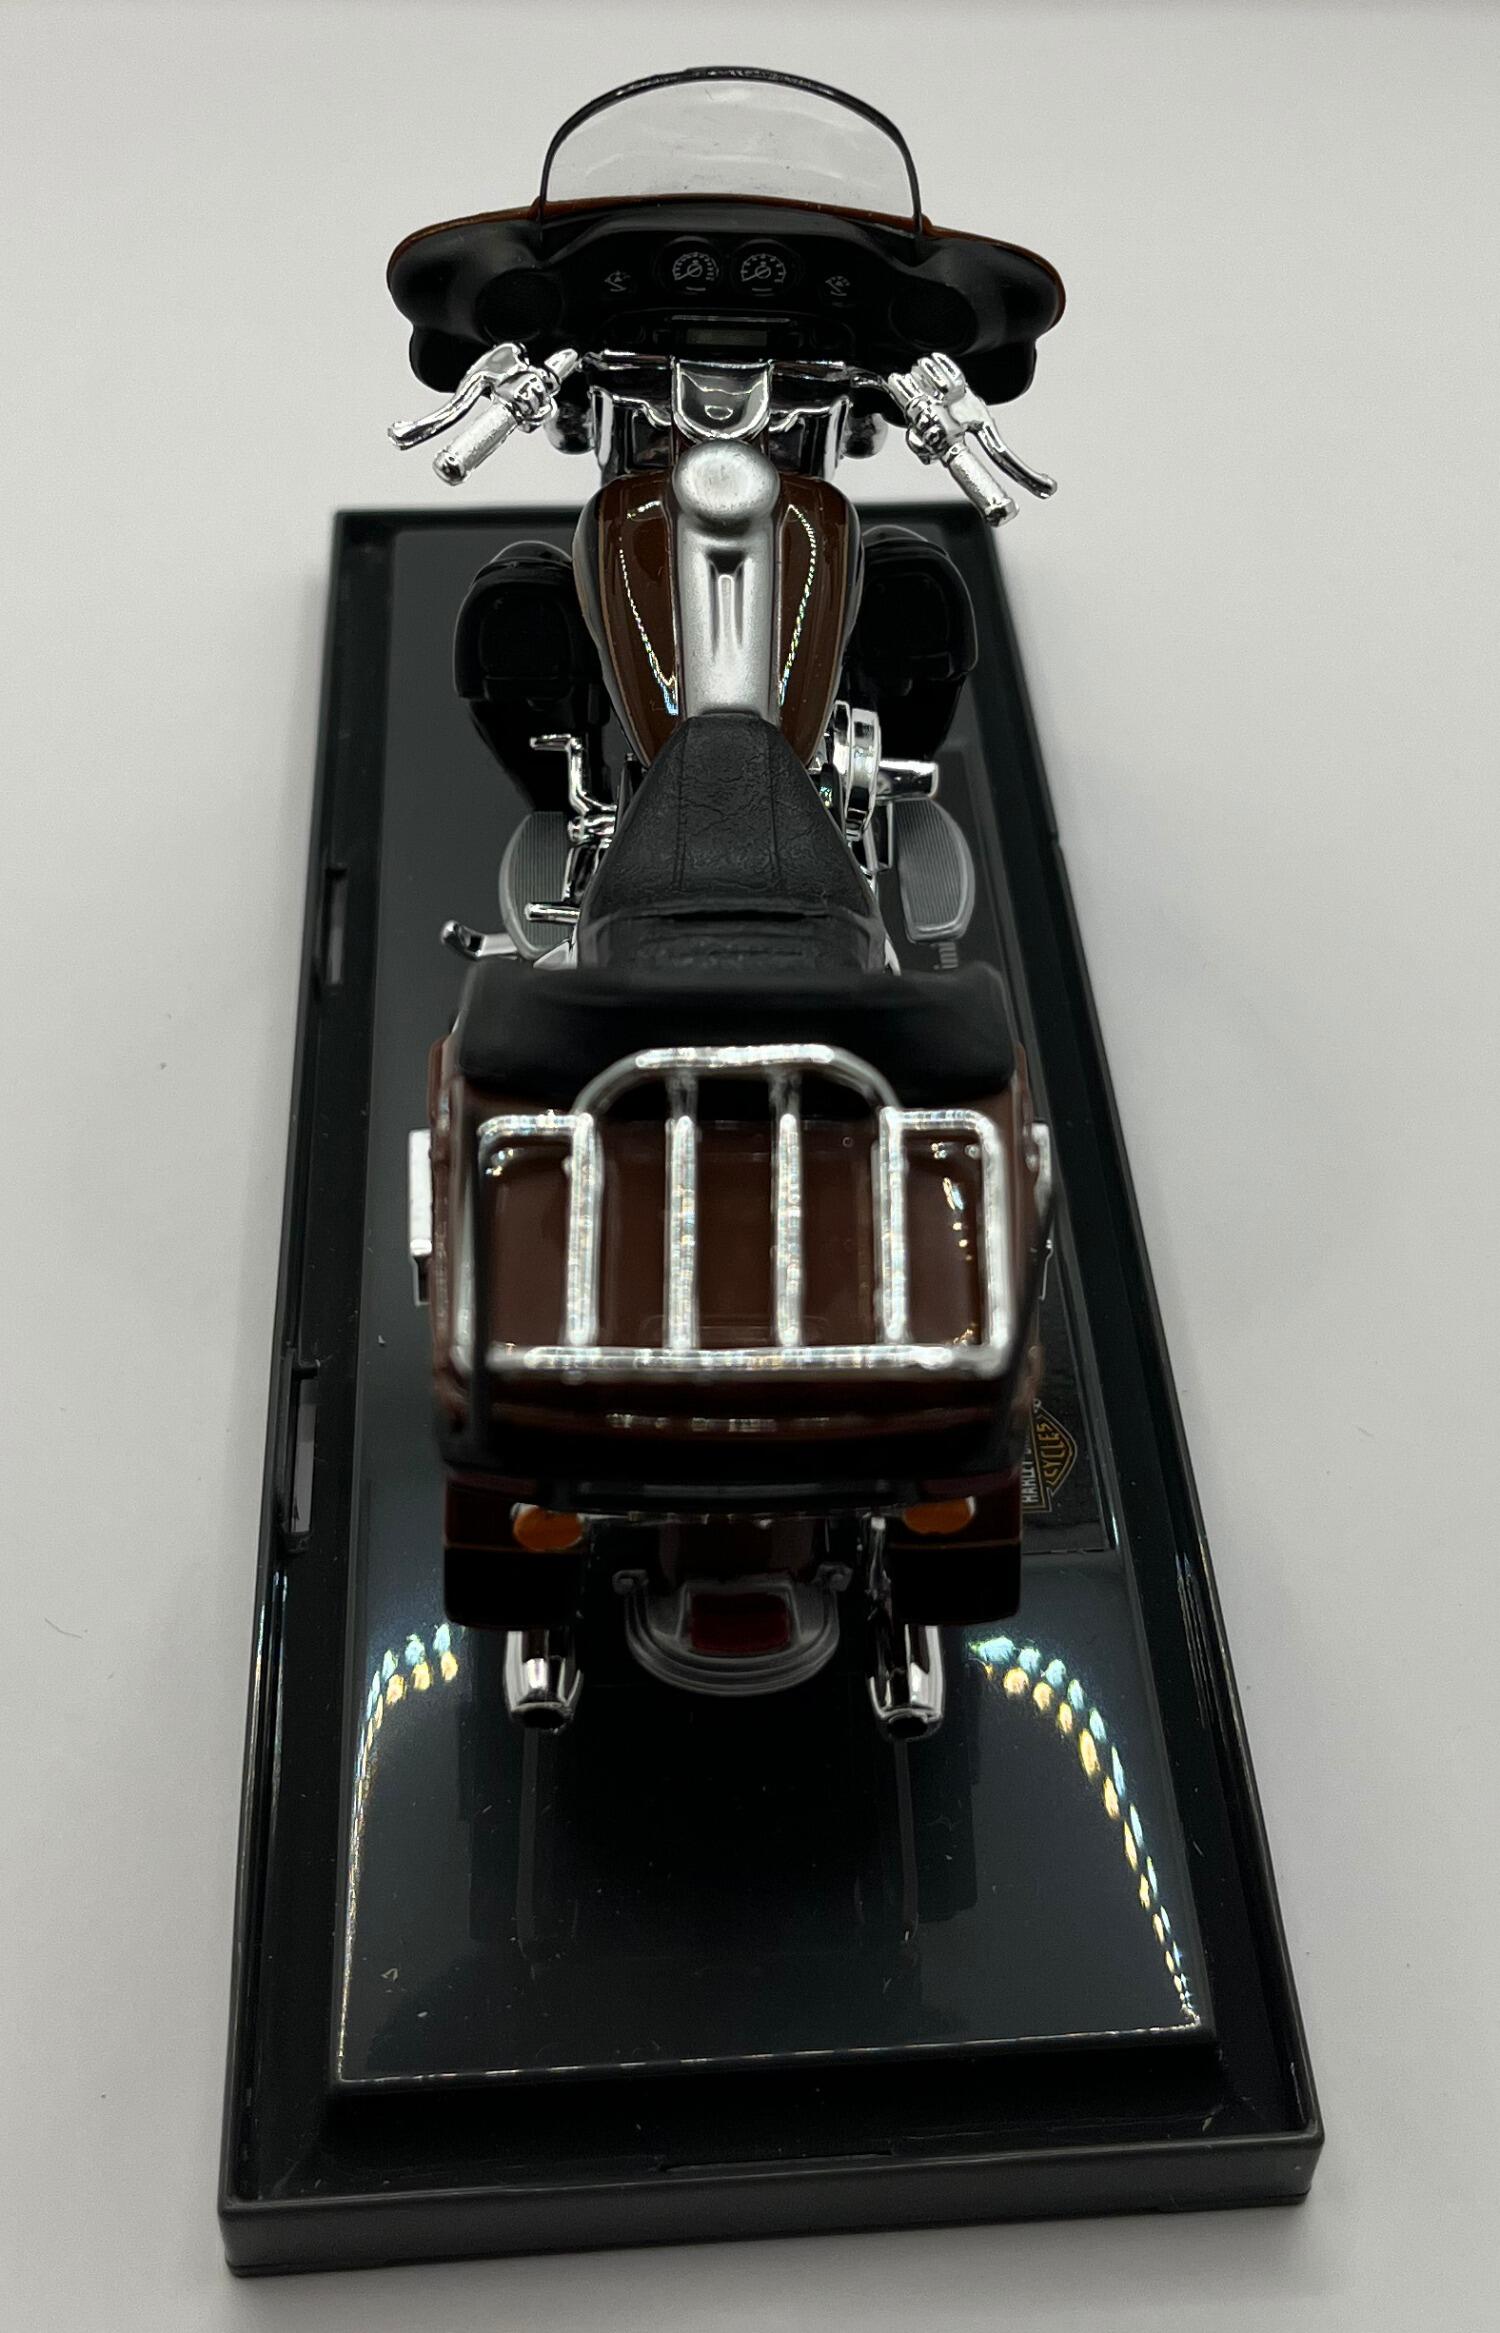 Harley Davidson FLHTK Electra Glide Ultra Limited 2013 in brown, 1:18 scale motorcycle model from Maisto